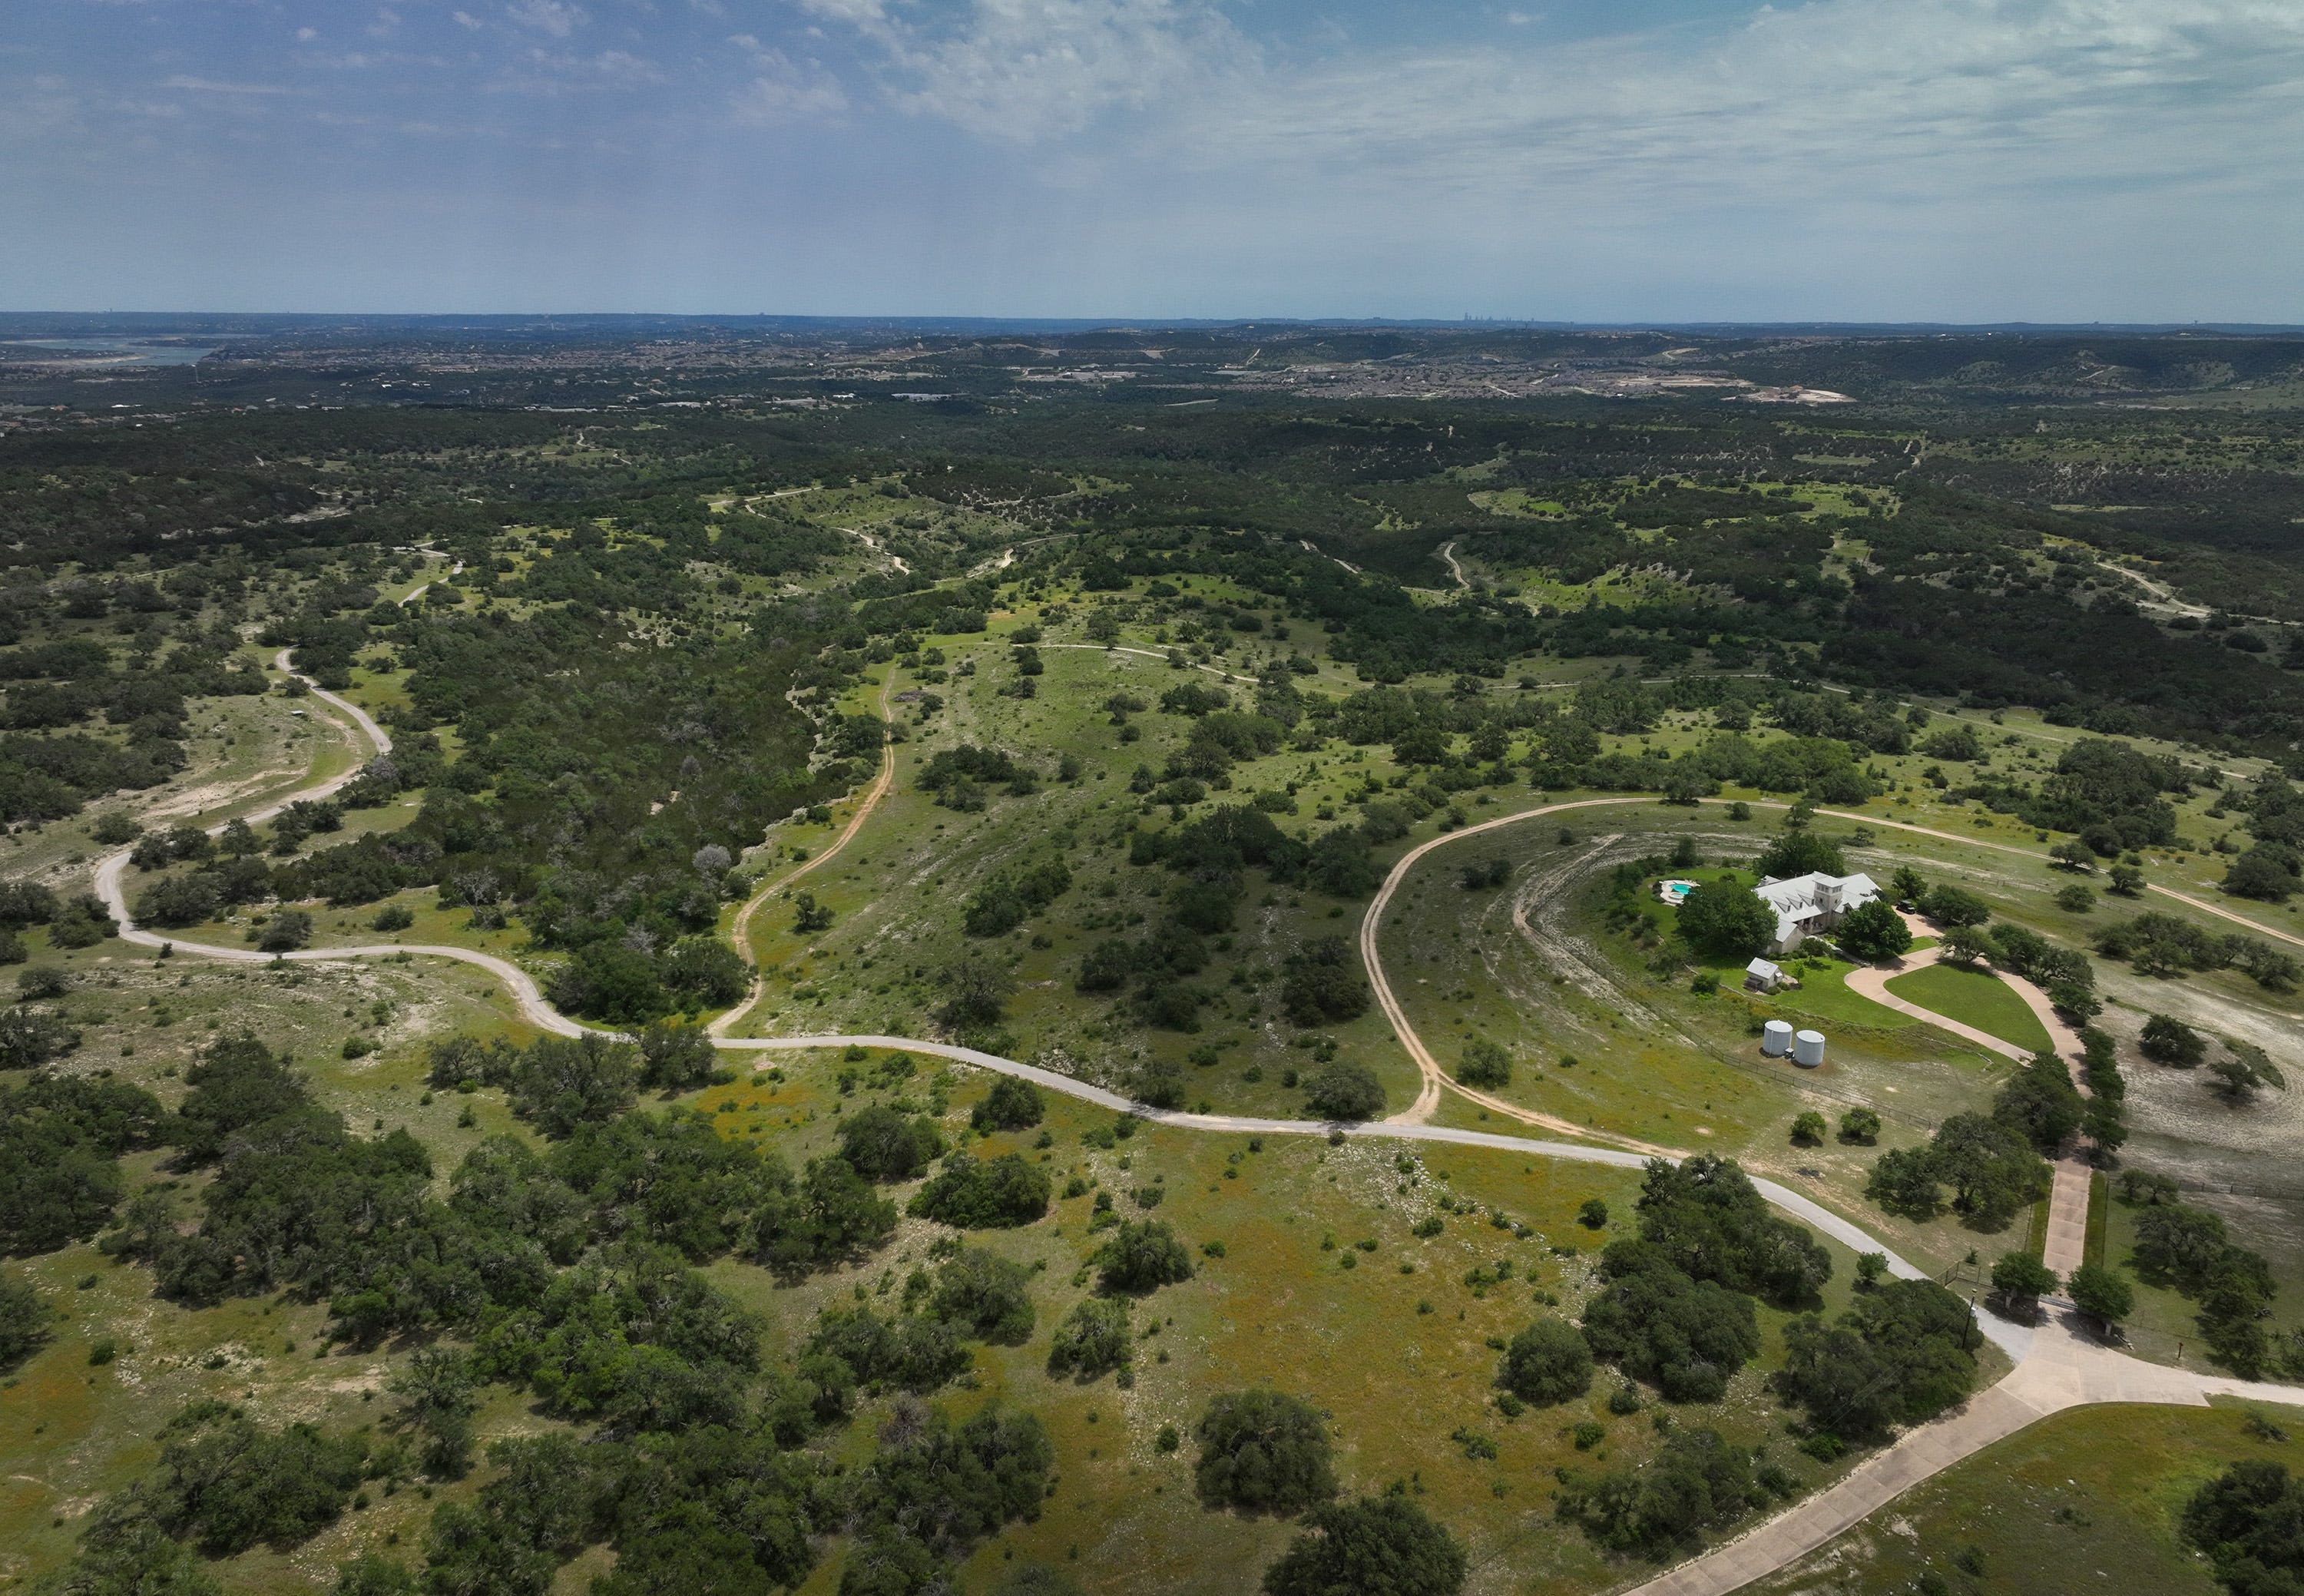 Exclusive: Travis County reaches $90M deal for 1,500 acre wilderness park near Spicewood